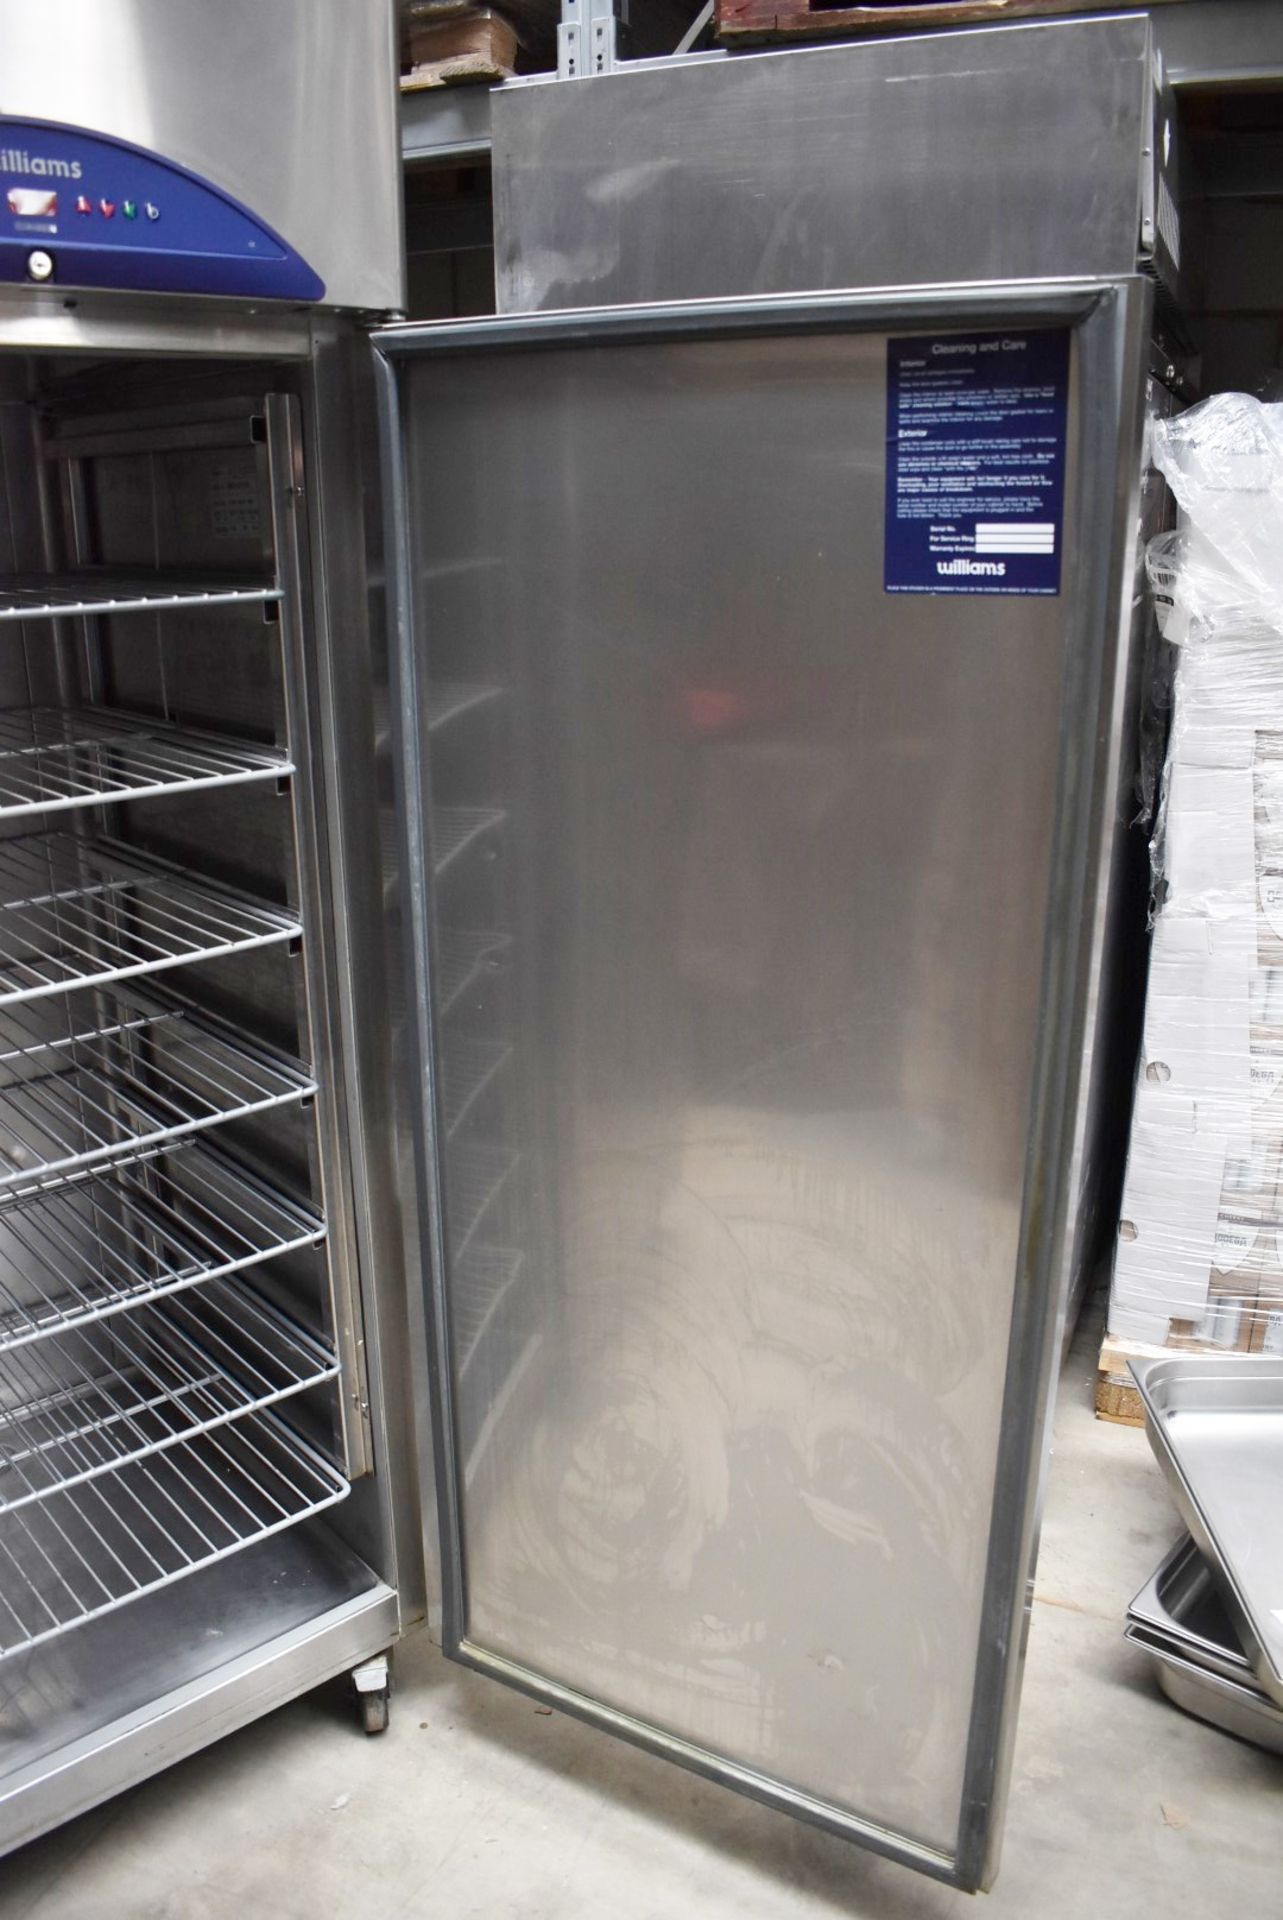 1 x Williams Double Door Upright Side by Side Refrigerator With Gastro Food Trays and Storage - Image 11 of 18